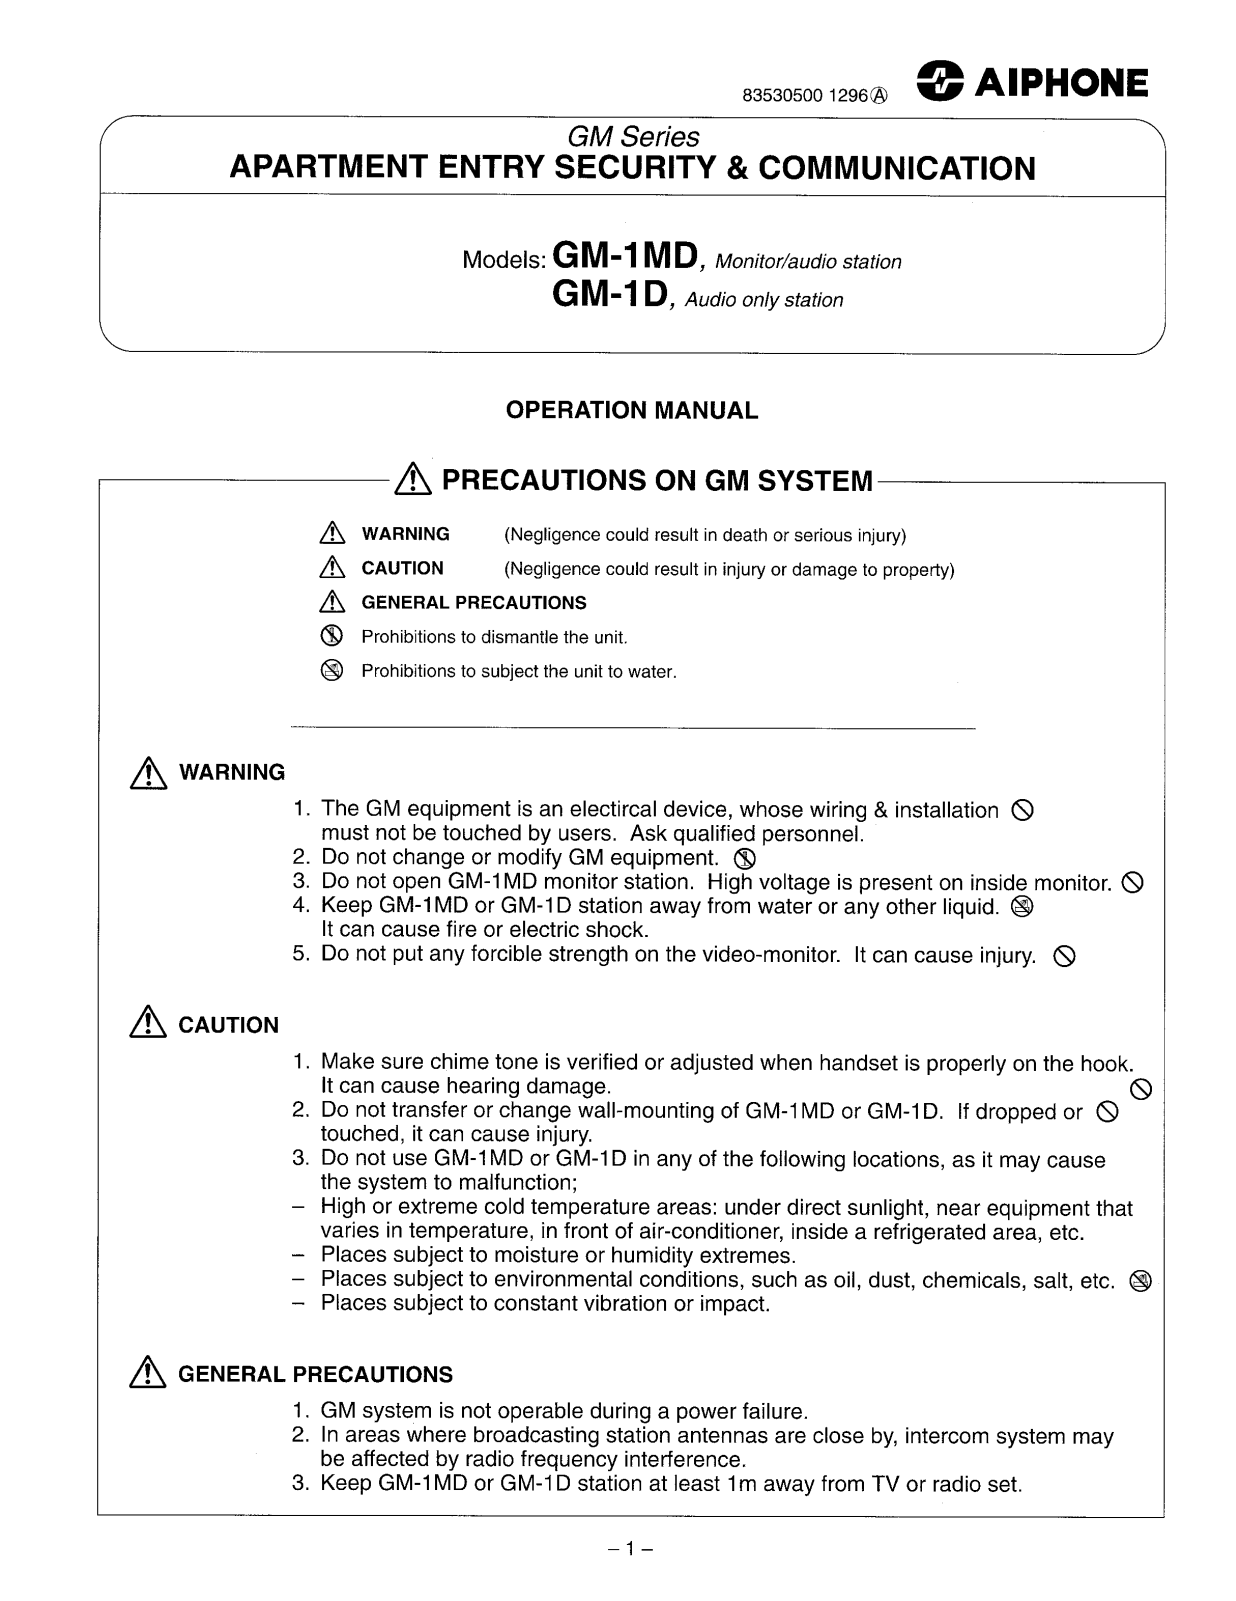 Aiphone GM-1MD, GM-1D Operation Manual